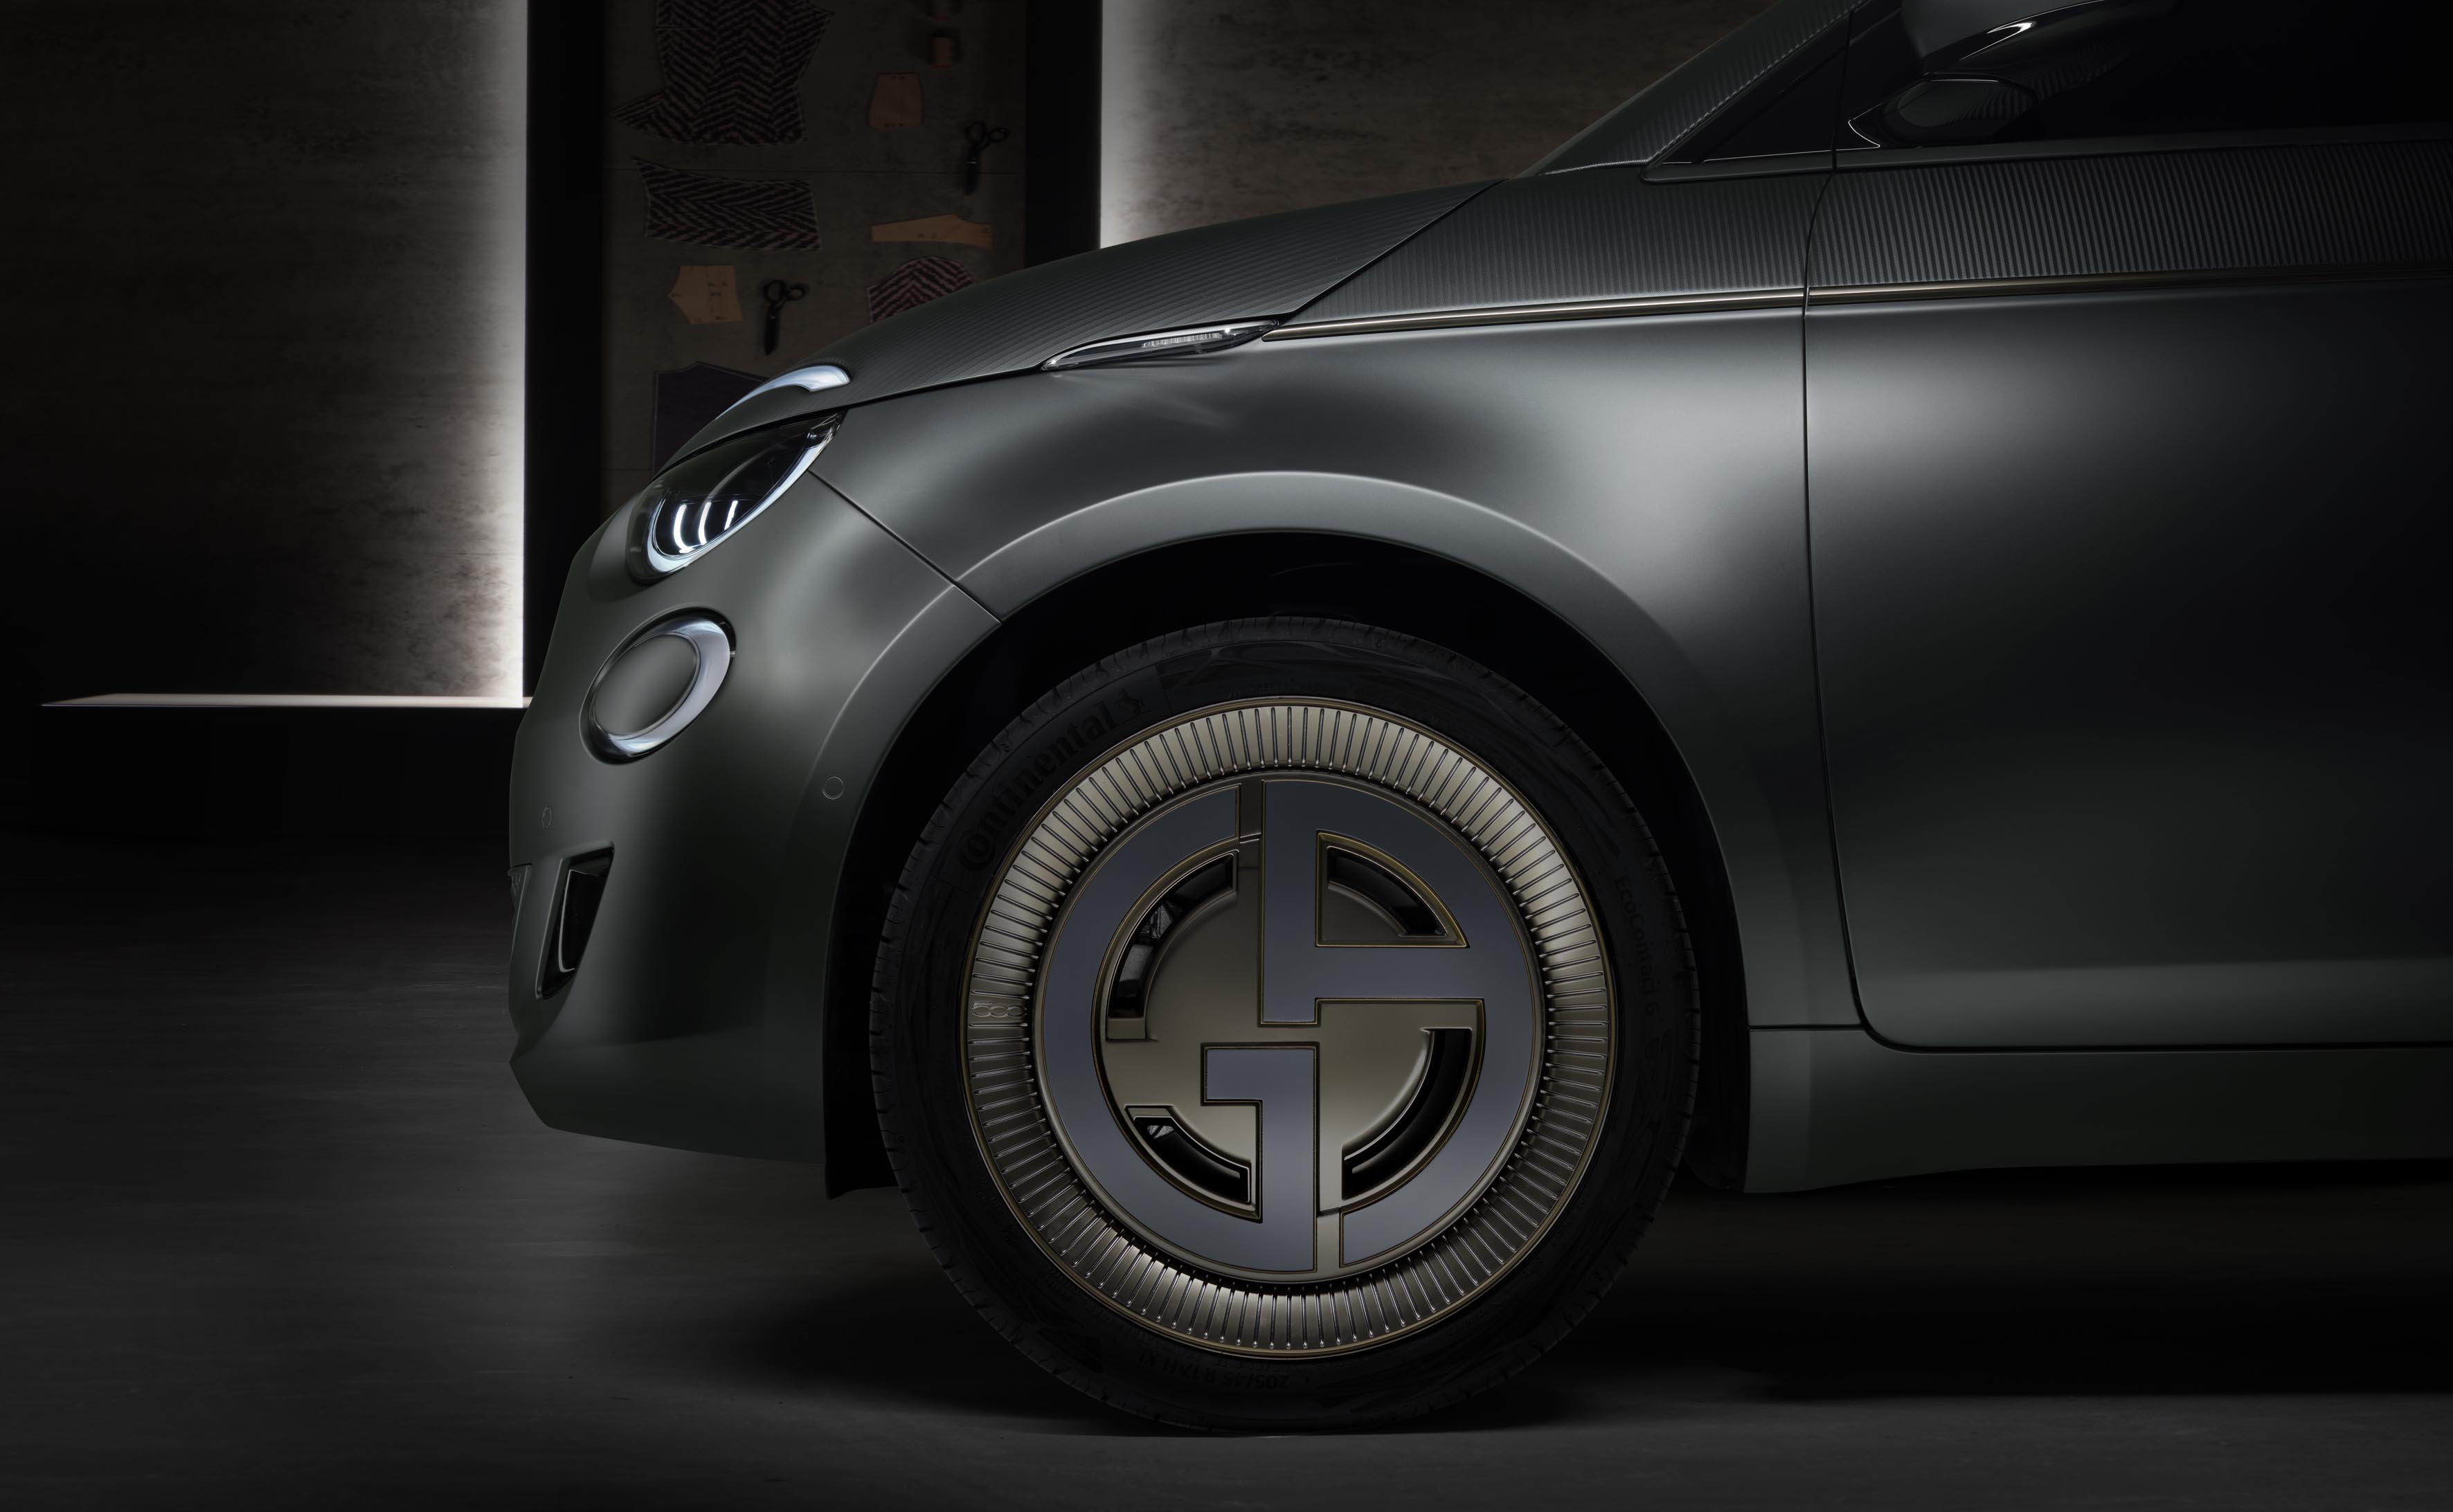 Introducing the sustainable Fiat 500 model, exclusively designed by Giorgio Armani (фото 1)